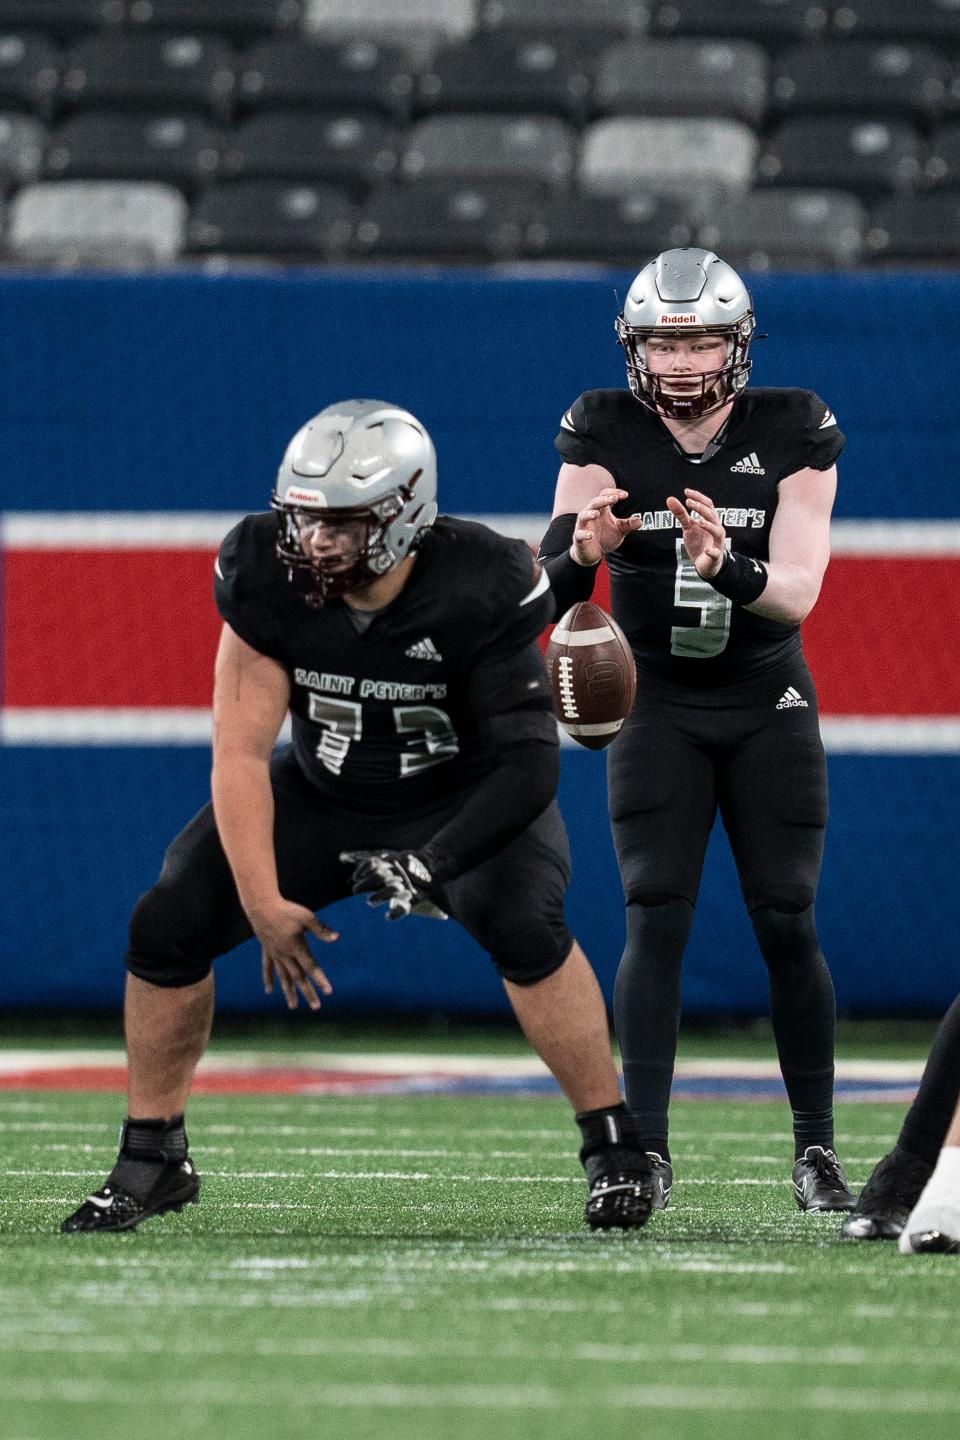 Don Bosco plays St. Peter's Prep in a football game at MetLife Stadium East Rutherford, NJ on Friday September 30, 2022. SPP #73 Nick Schoen and SPP #5 Champ Long.